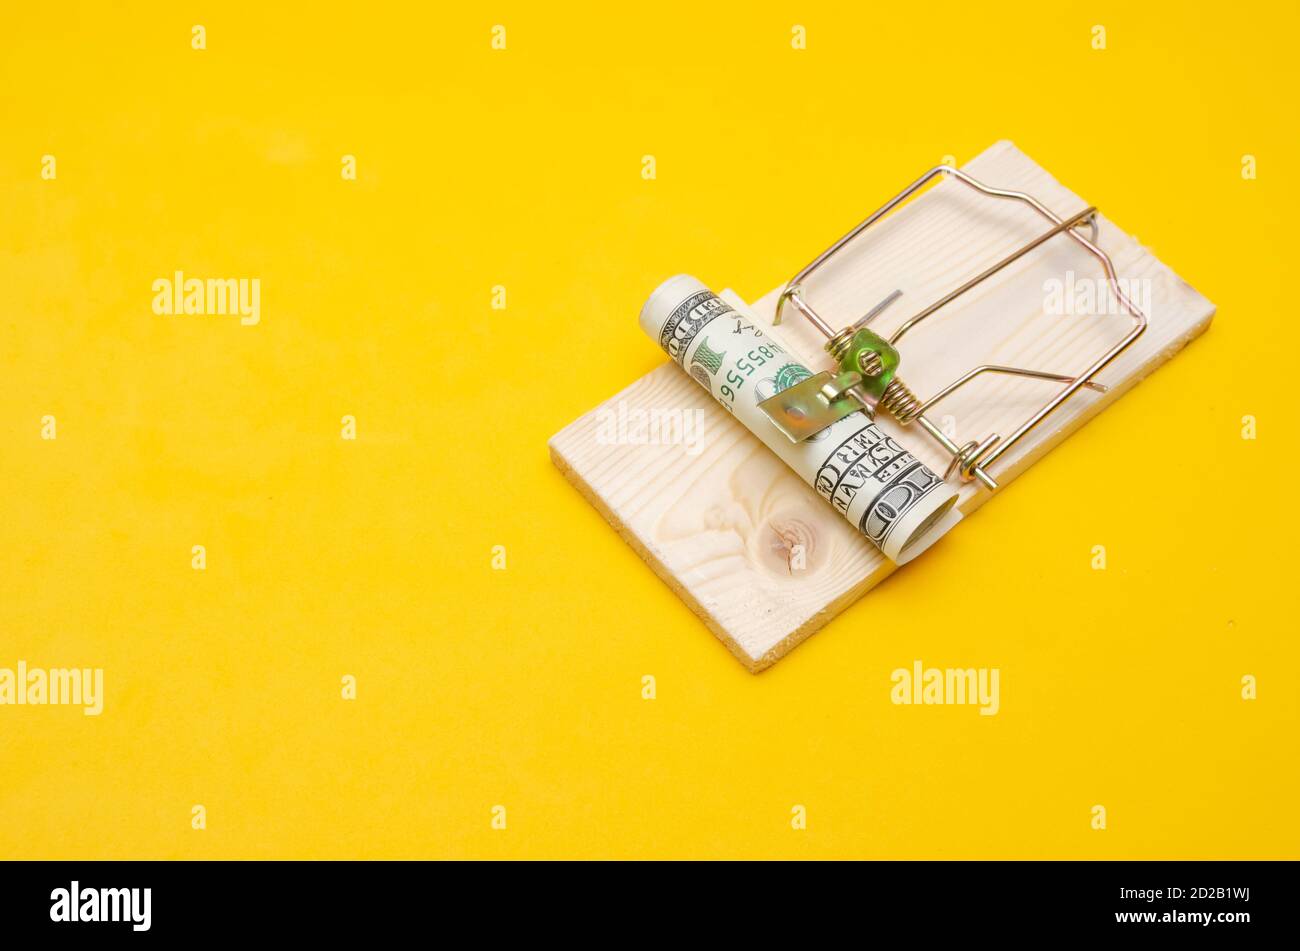 https://c8.alamy.com/comp/2D2B1WJ/dollars-in-a-mousetrap-with-a-hundred-dollar-bill-on-a-yellow-background-with-a-copy-space-2D2B1WJ.jpg